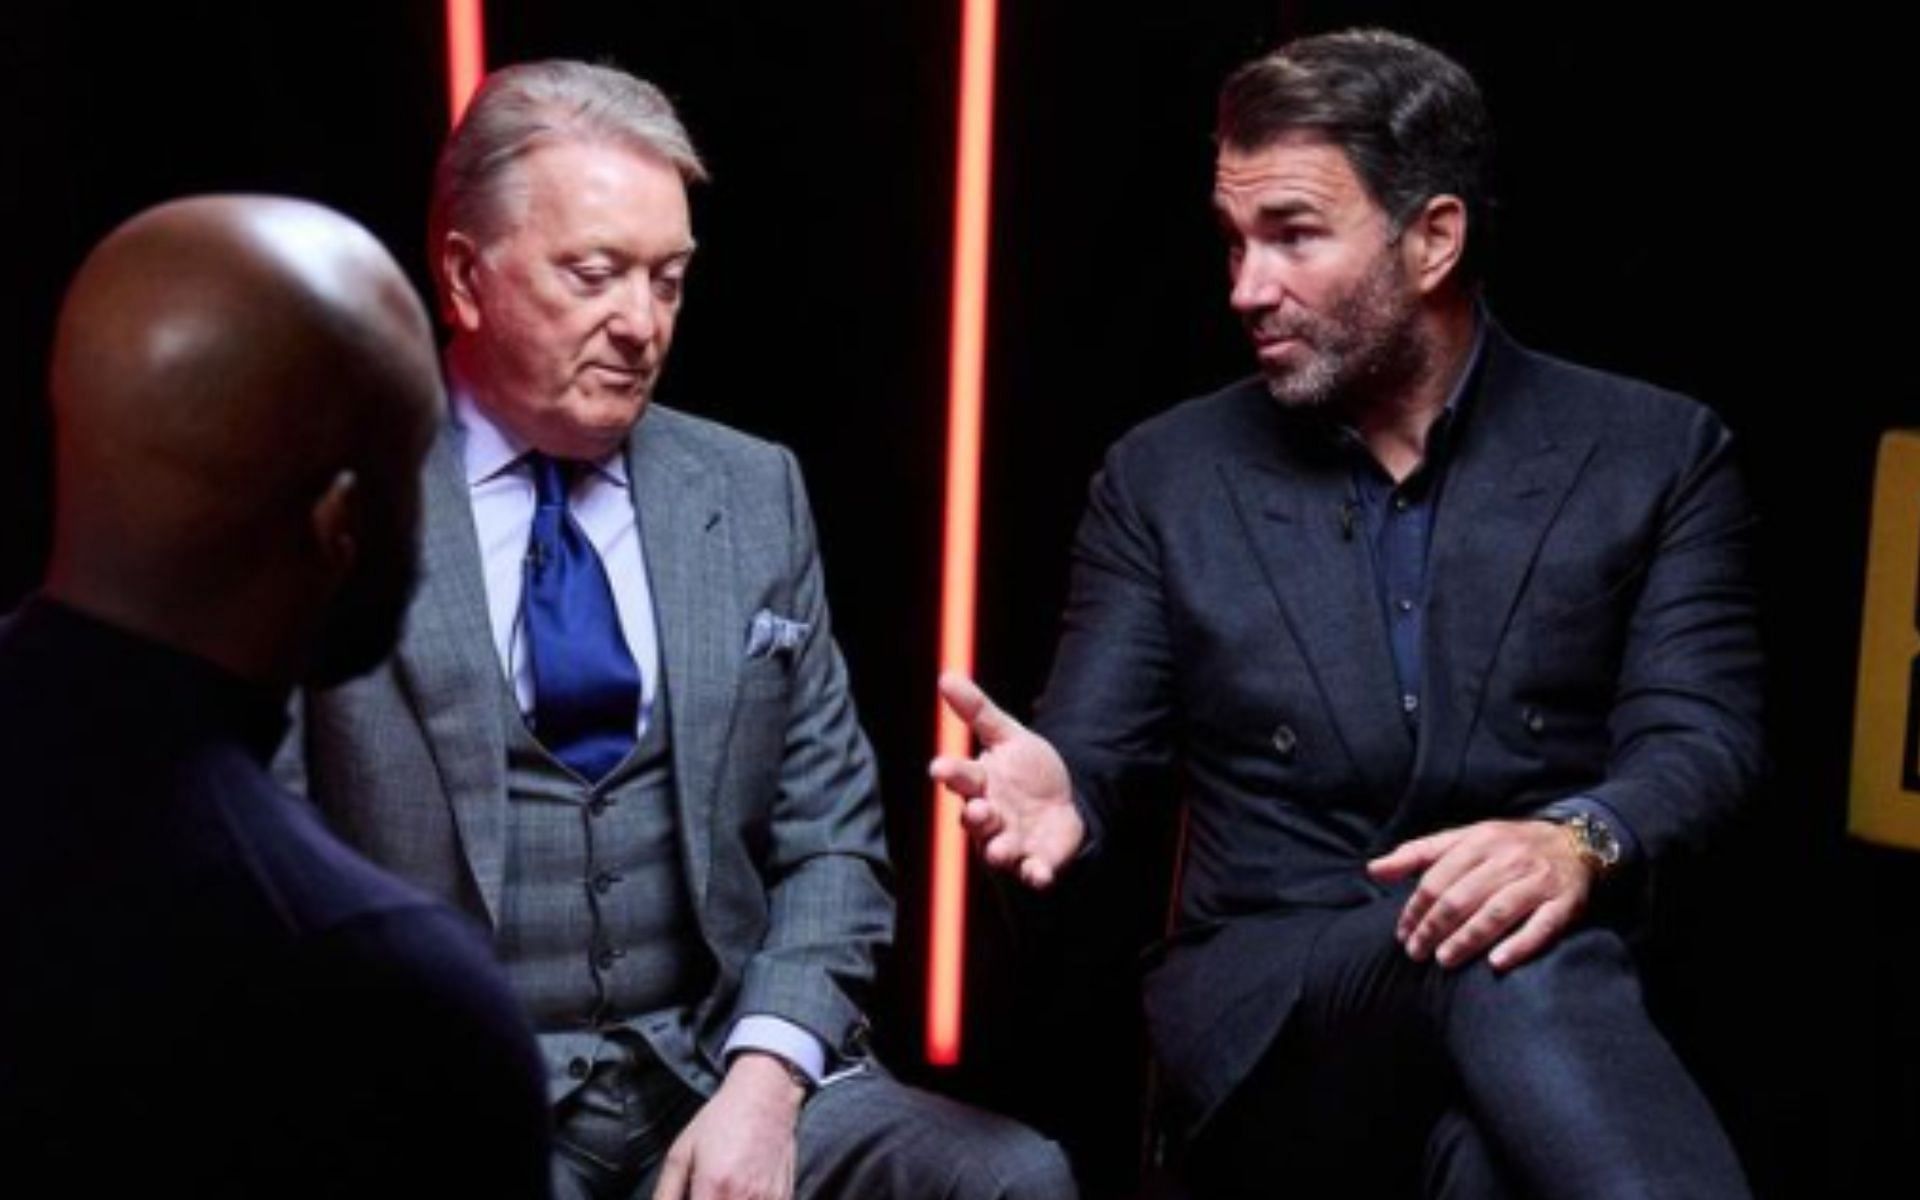 Eddie Hearn and Frank Warren are working closely together. [Image via @EddieHearn on Instagram]